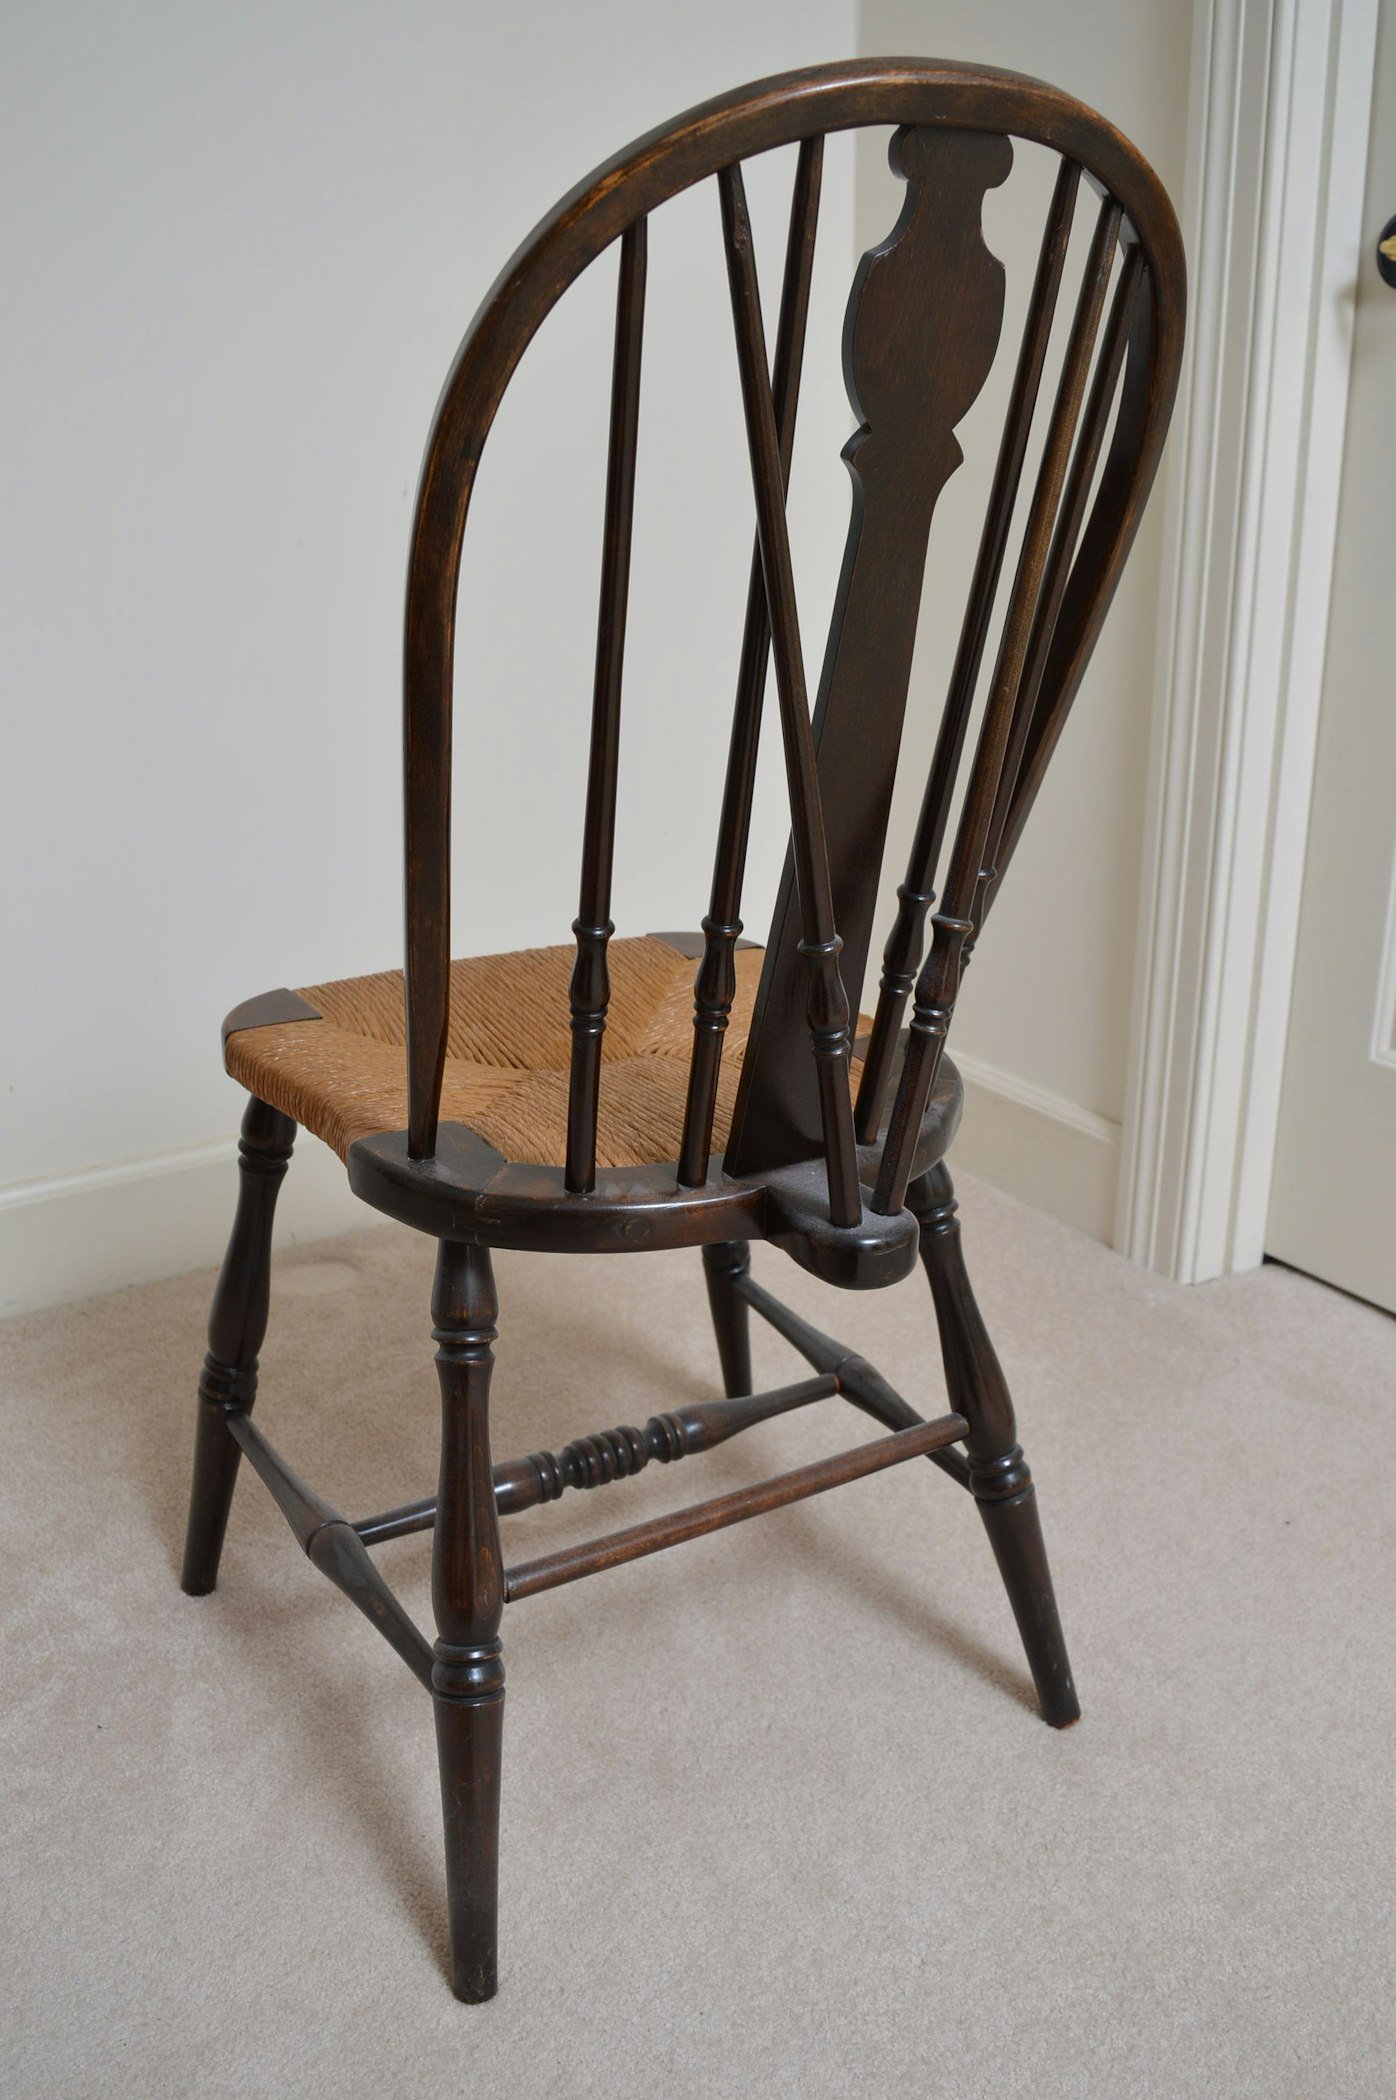 Antique Windsor Chairs with Rush Woven Seats | EBTH